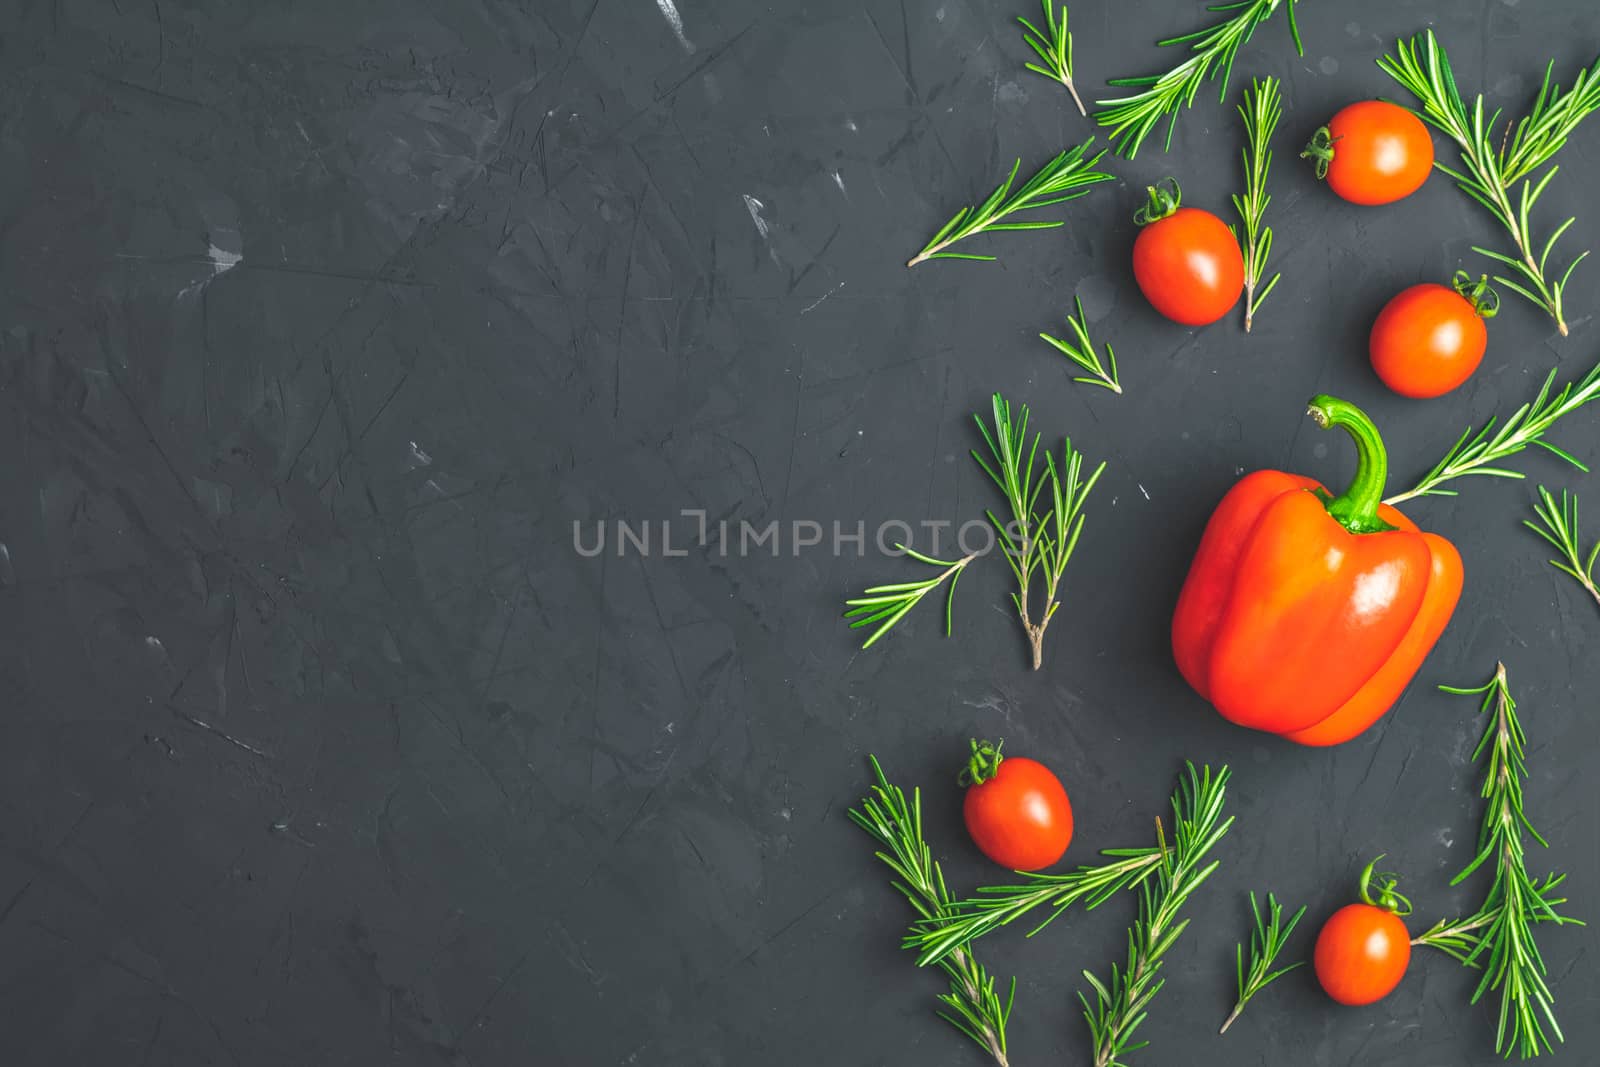 Rosemary bunch, raw pepper and cherry tomatoes on black stone concrete textured surface background. Top view with copy space for your text.